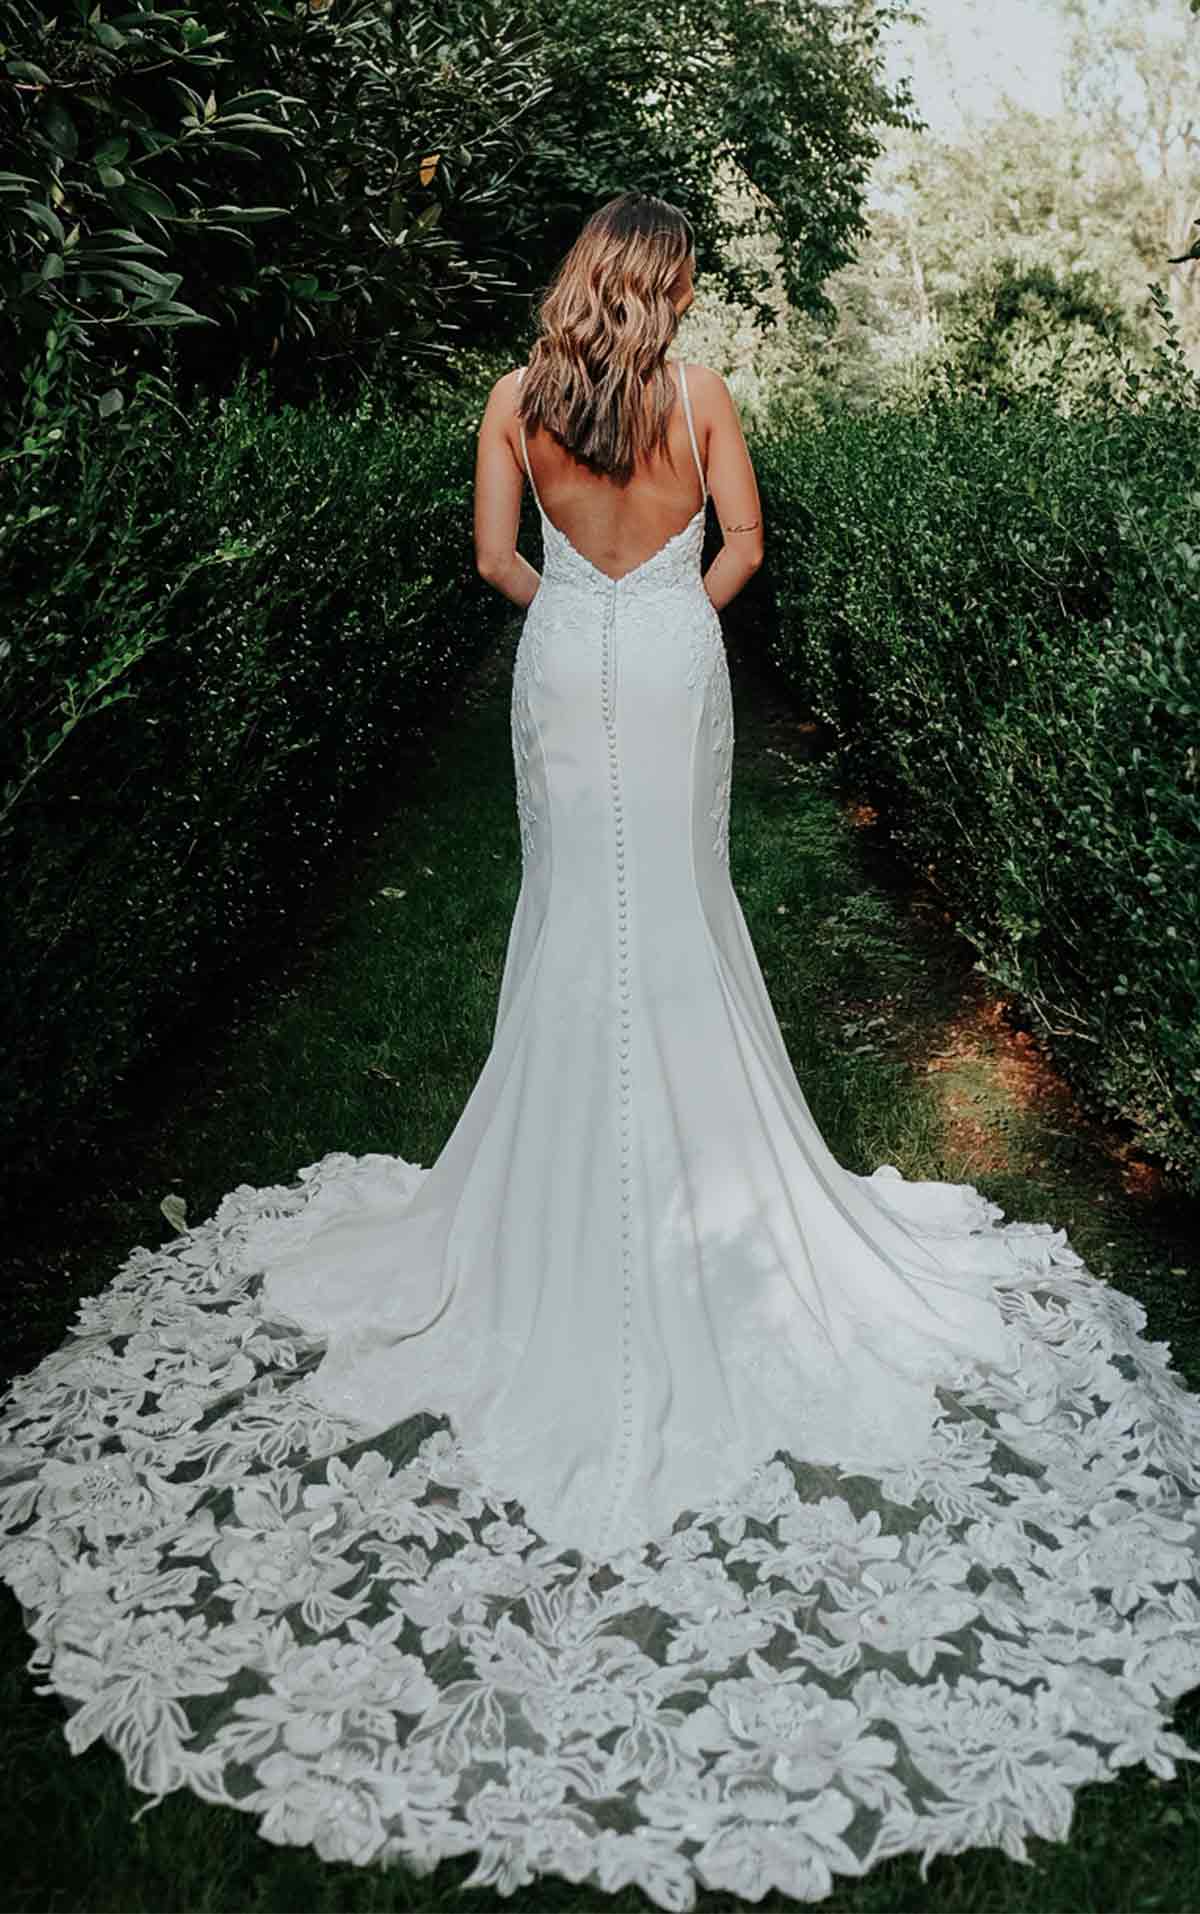 Essense of Australia wedding dress with low back and long train